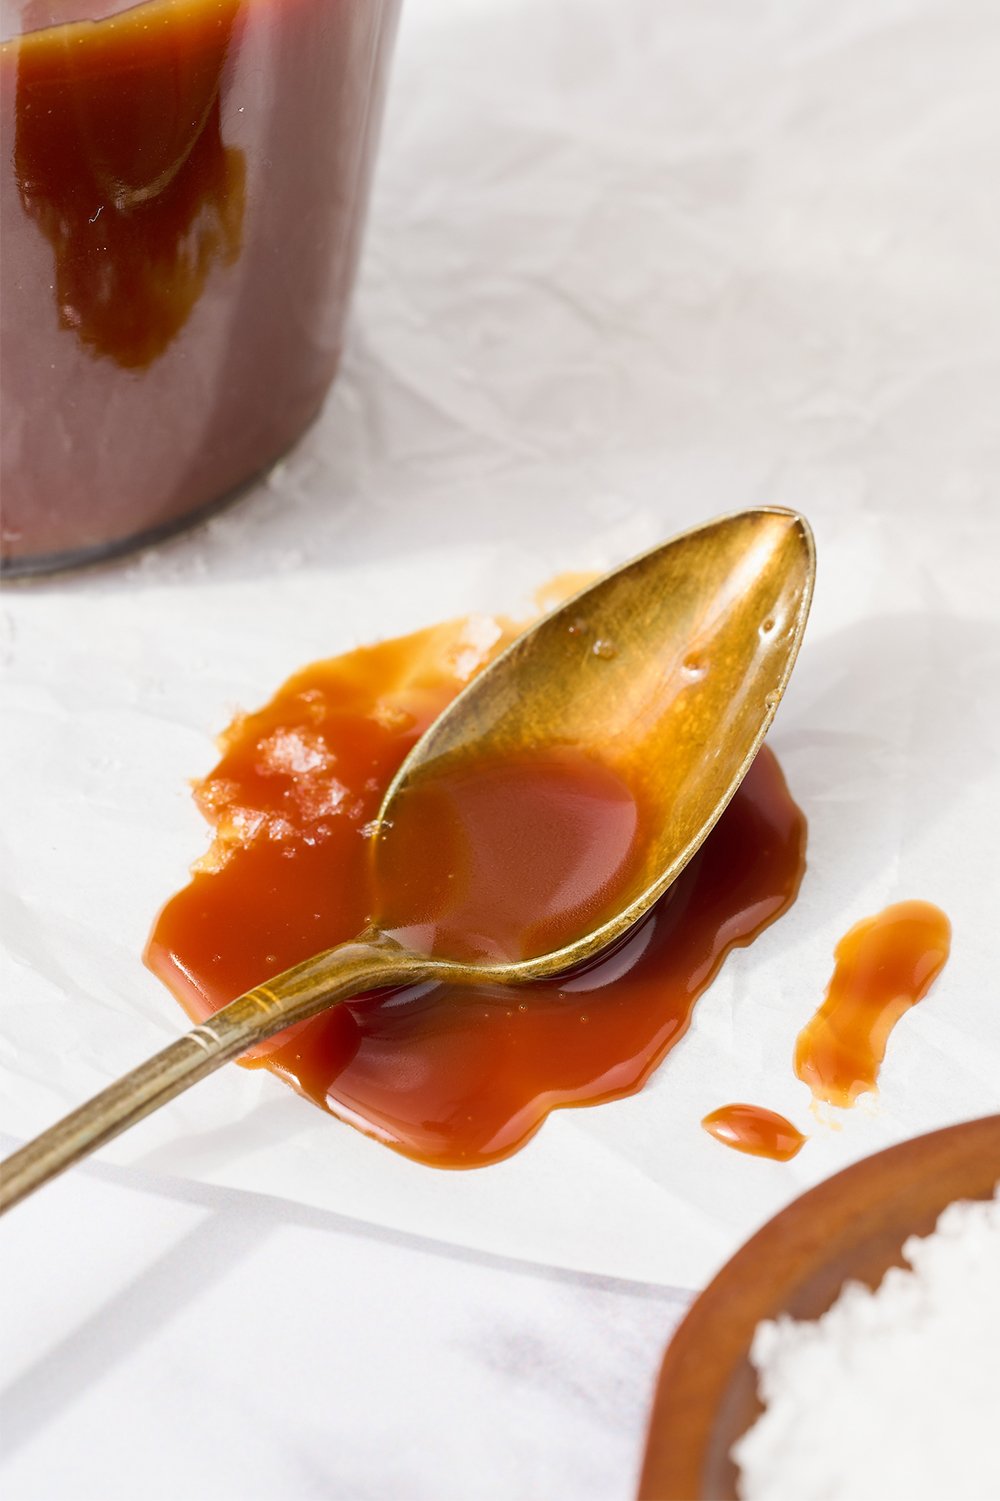 a spoon with some leftover caramel on it, resting in a small pool of caramel.